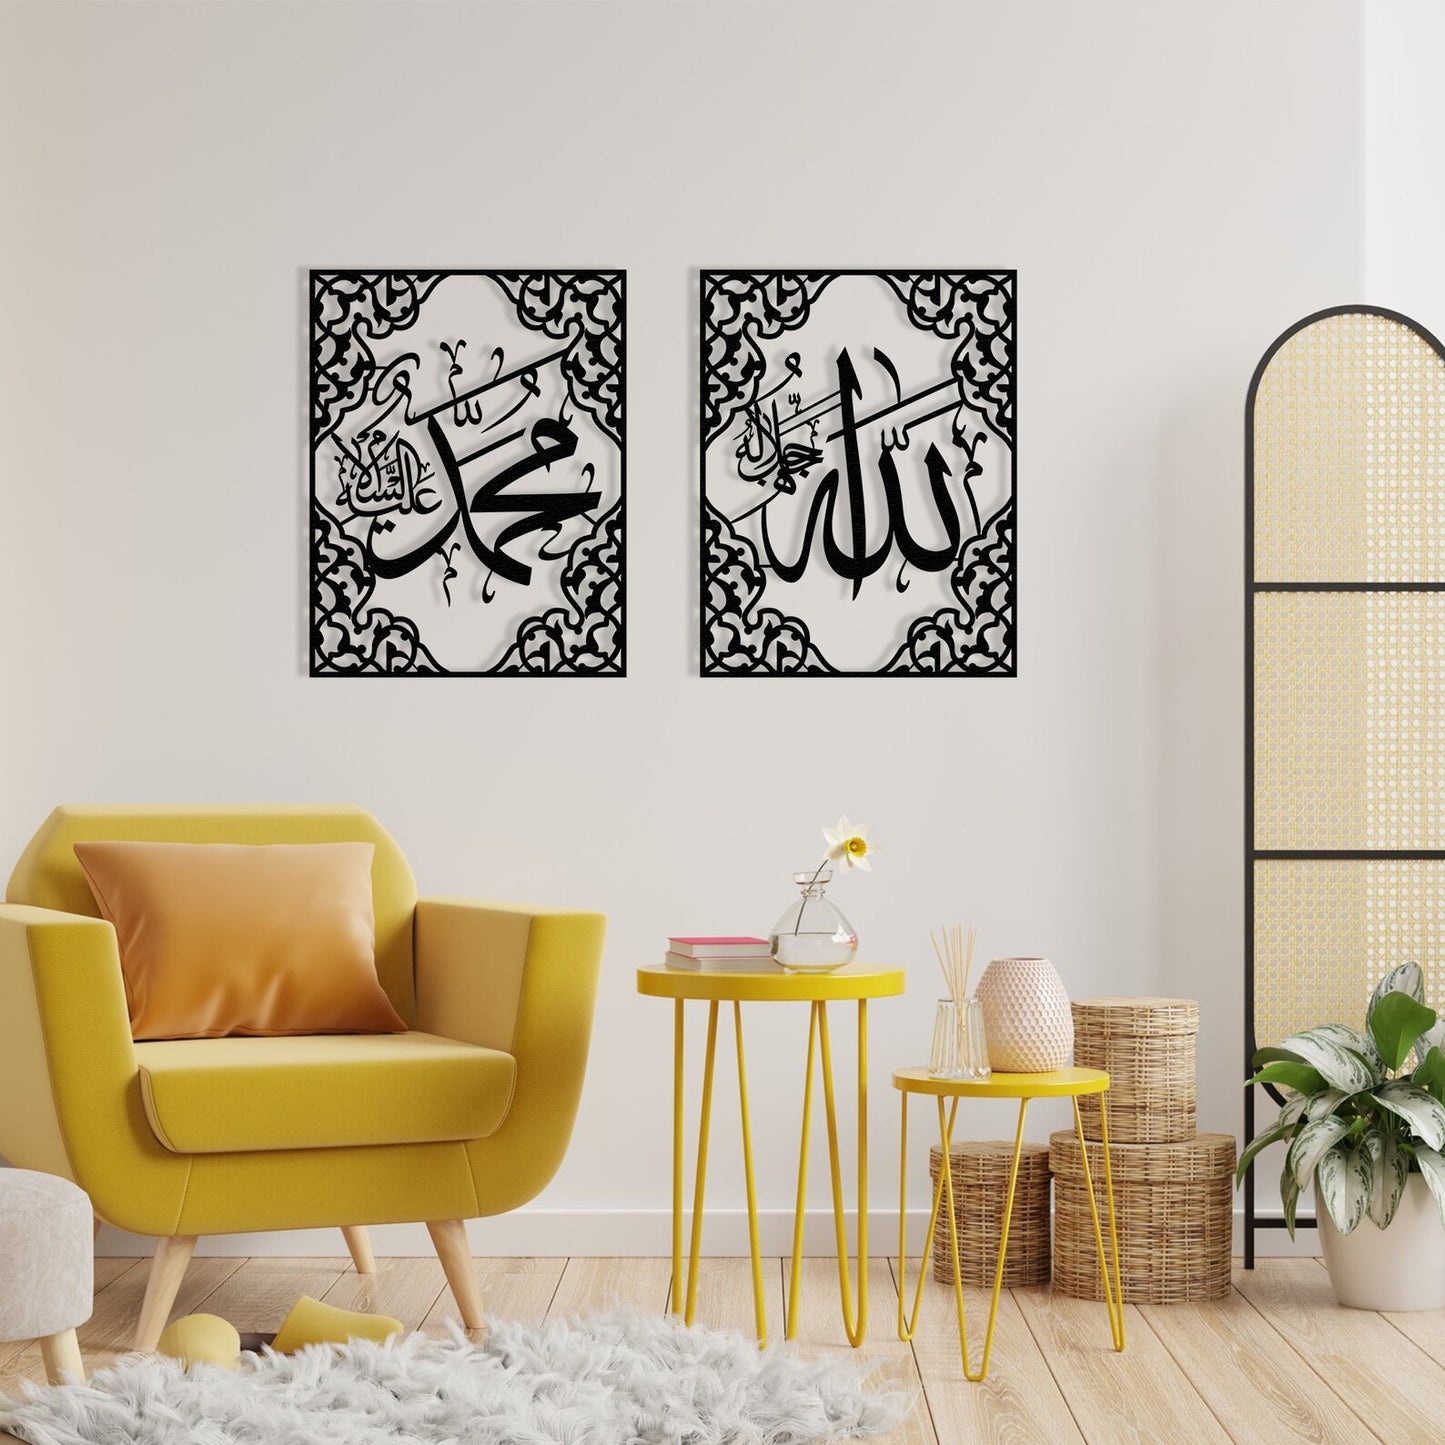 ALLAH (SAW) MUHAMMAD(PBUH) WALL TUGRA FRAME FOR HOME SIZE-12 INCH BY 16 INCH